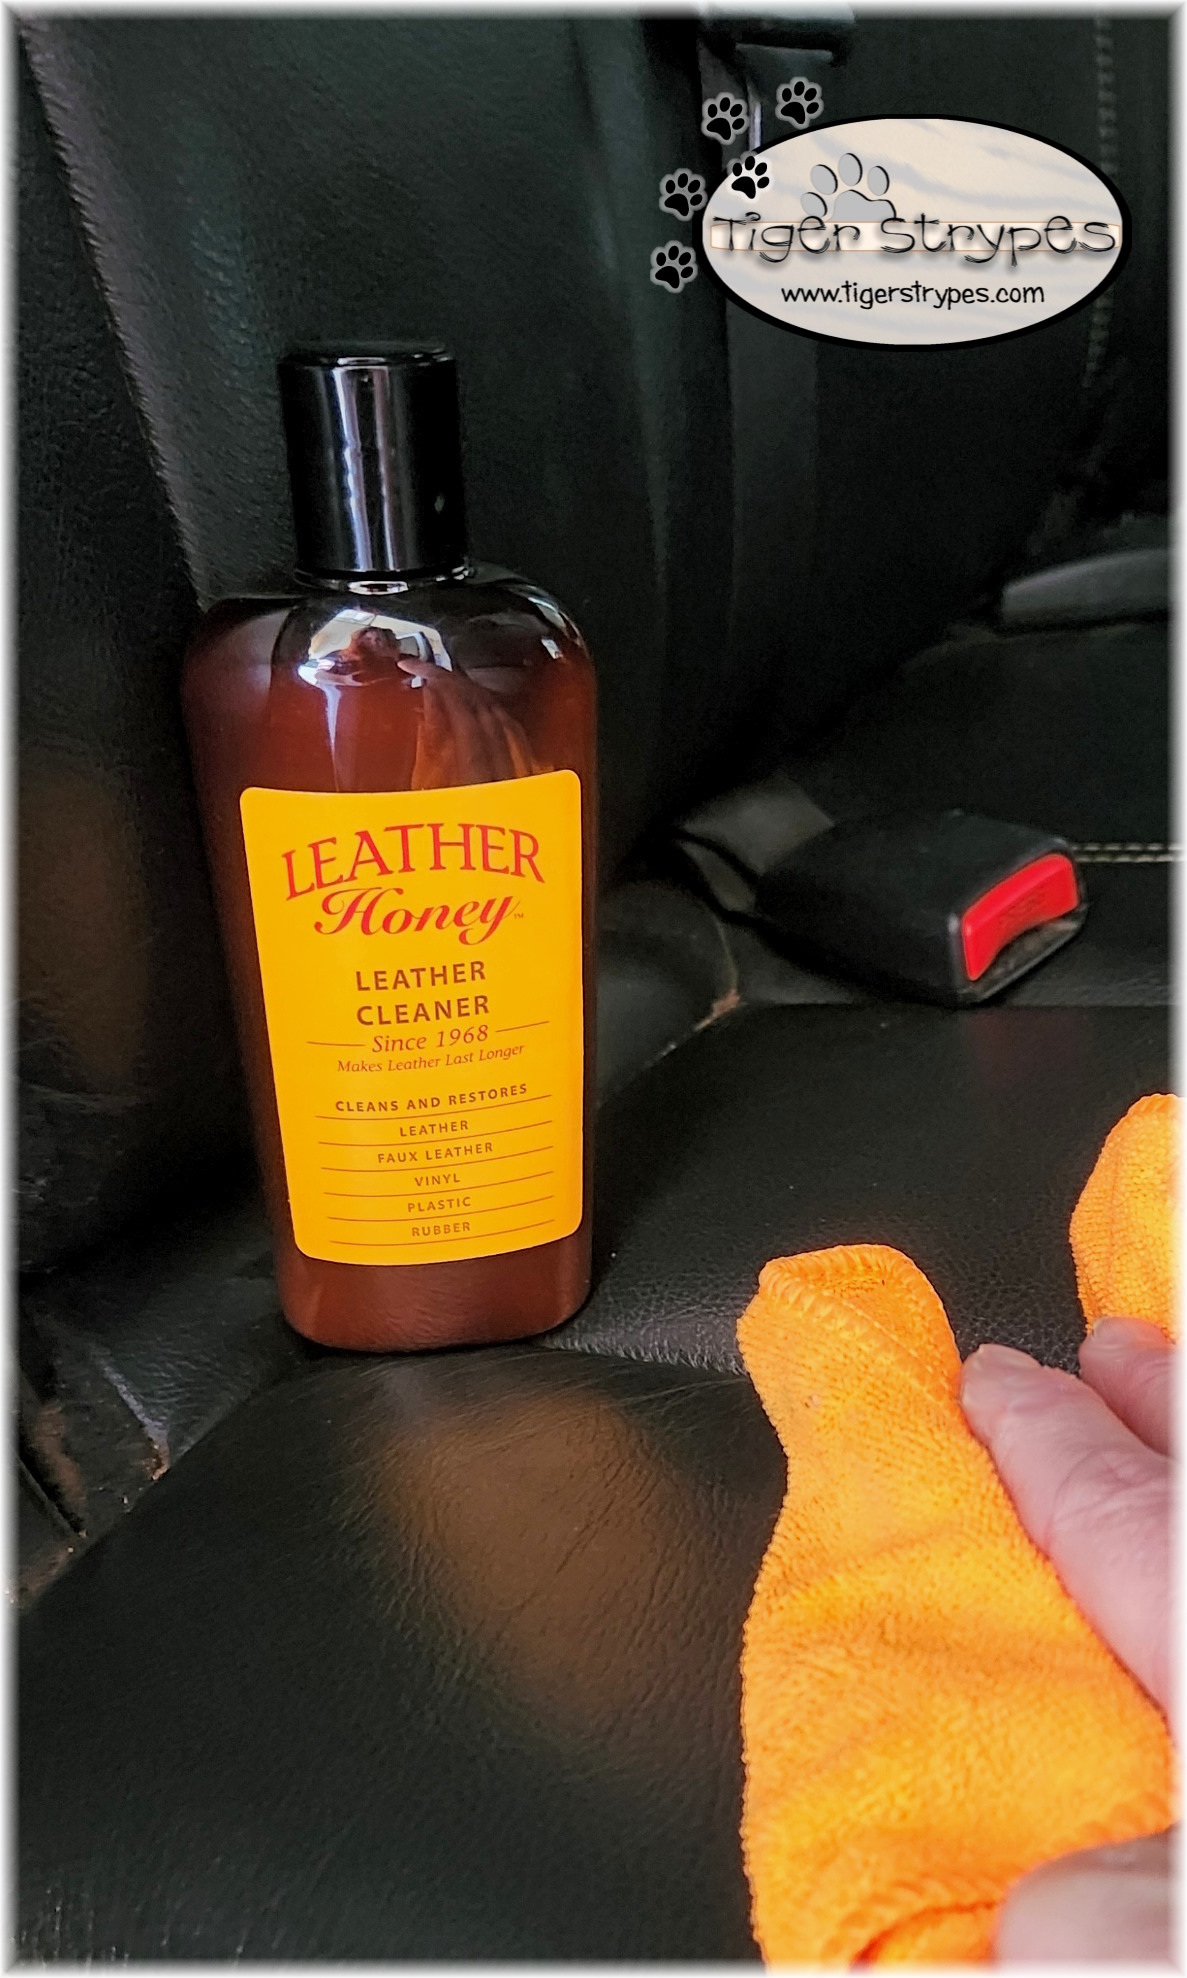 Best Leather Softener: How to Soften Leather - Leather Honey